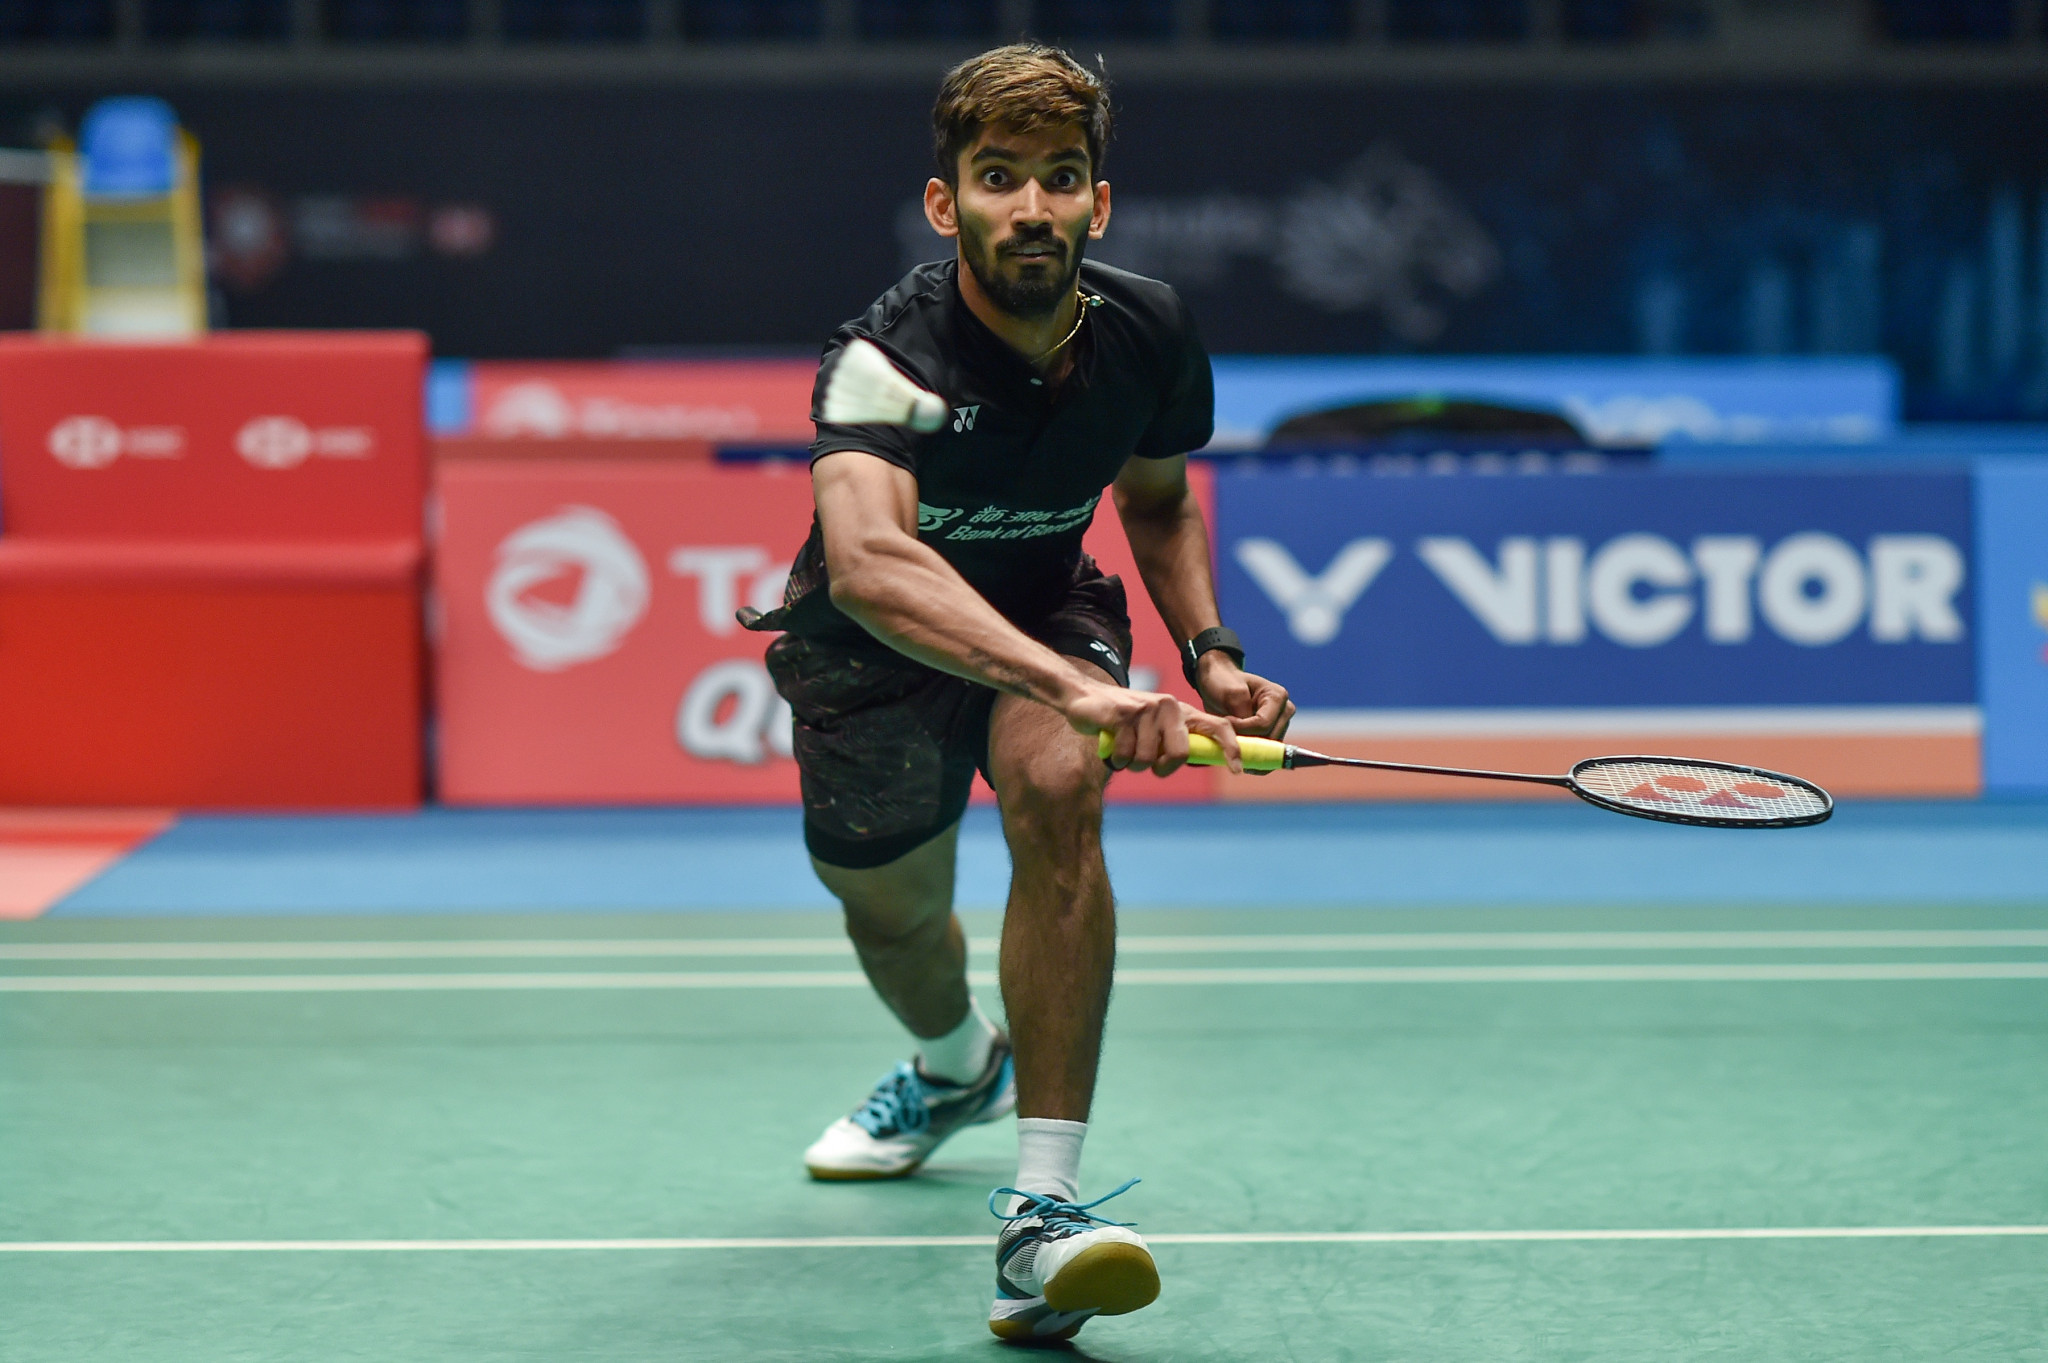 India’s Srikanth Kidambi is looking to bounce back from his semi-final exit at the BWF Malaysia Open as he bids to defend his Indonesia Open crown in Jakarta this week ©Getty Images